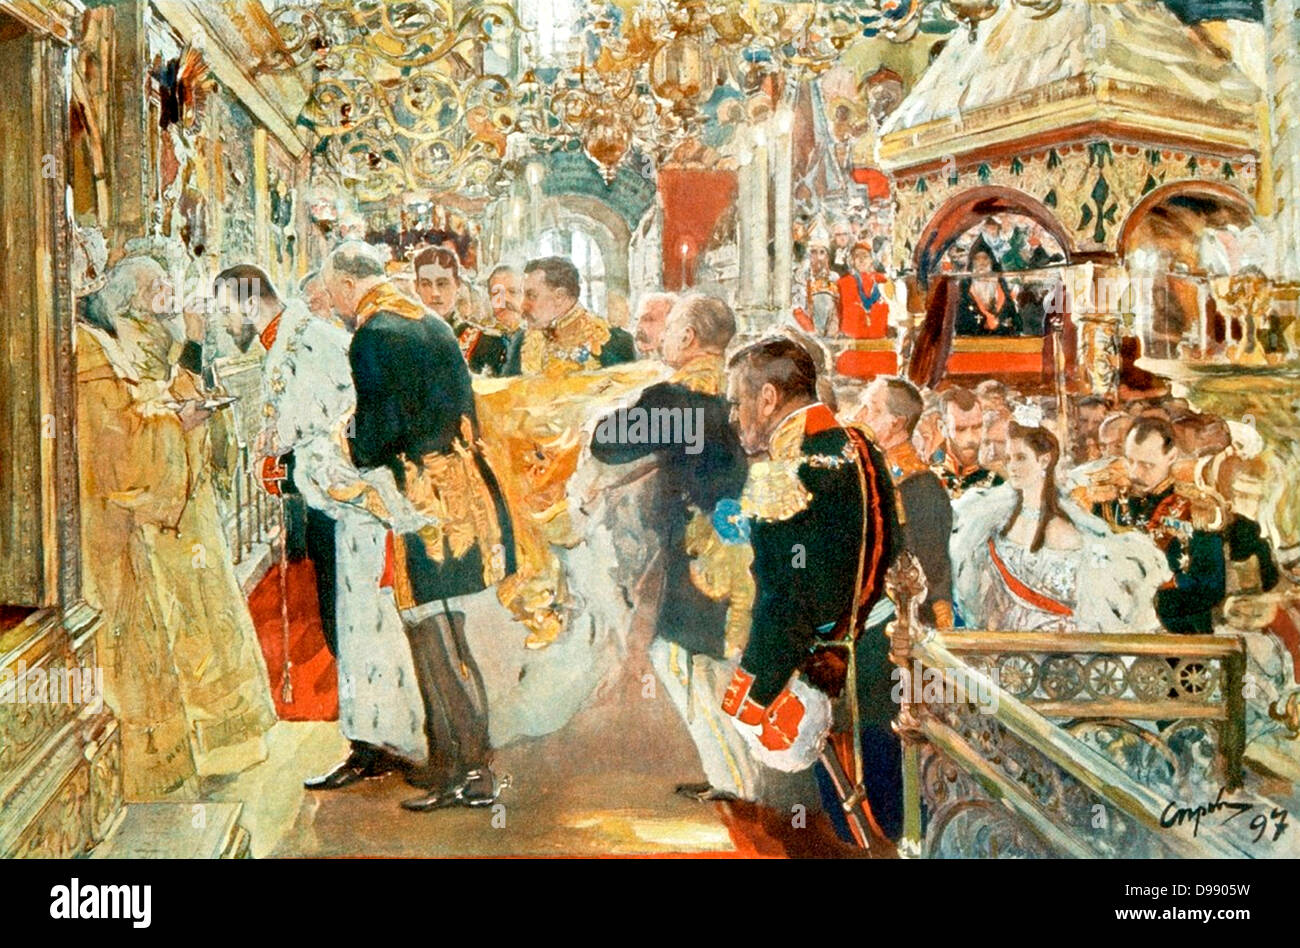 Portrait by Valentin Serov of the anointing of Tsar Nicholas II and the Empress Alexandra Fyodorovna at their coronation. 1897 Stock Photo